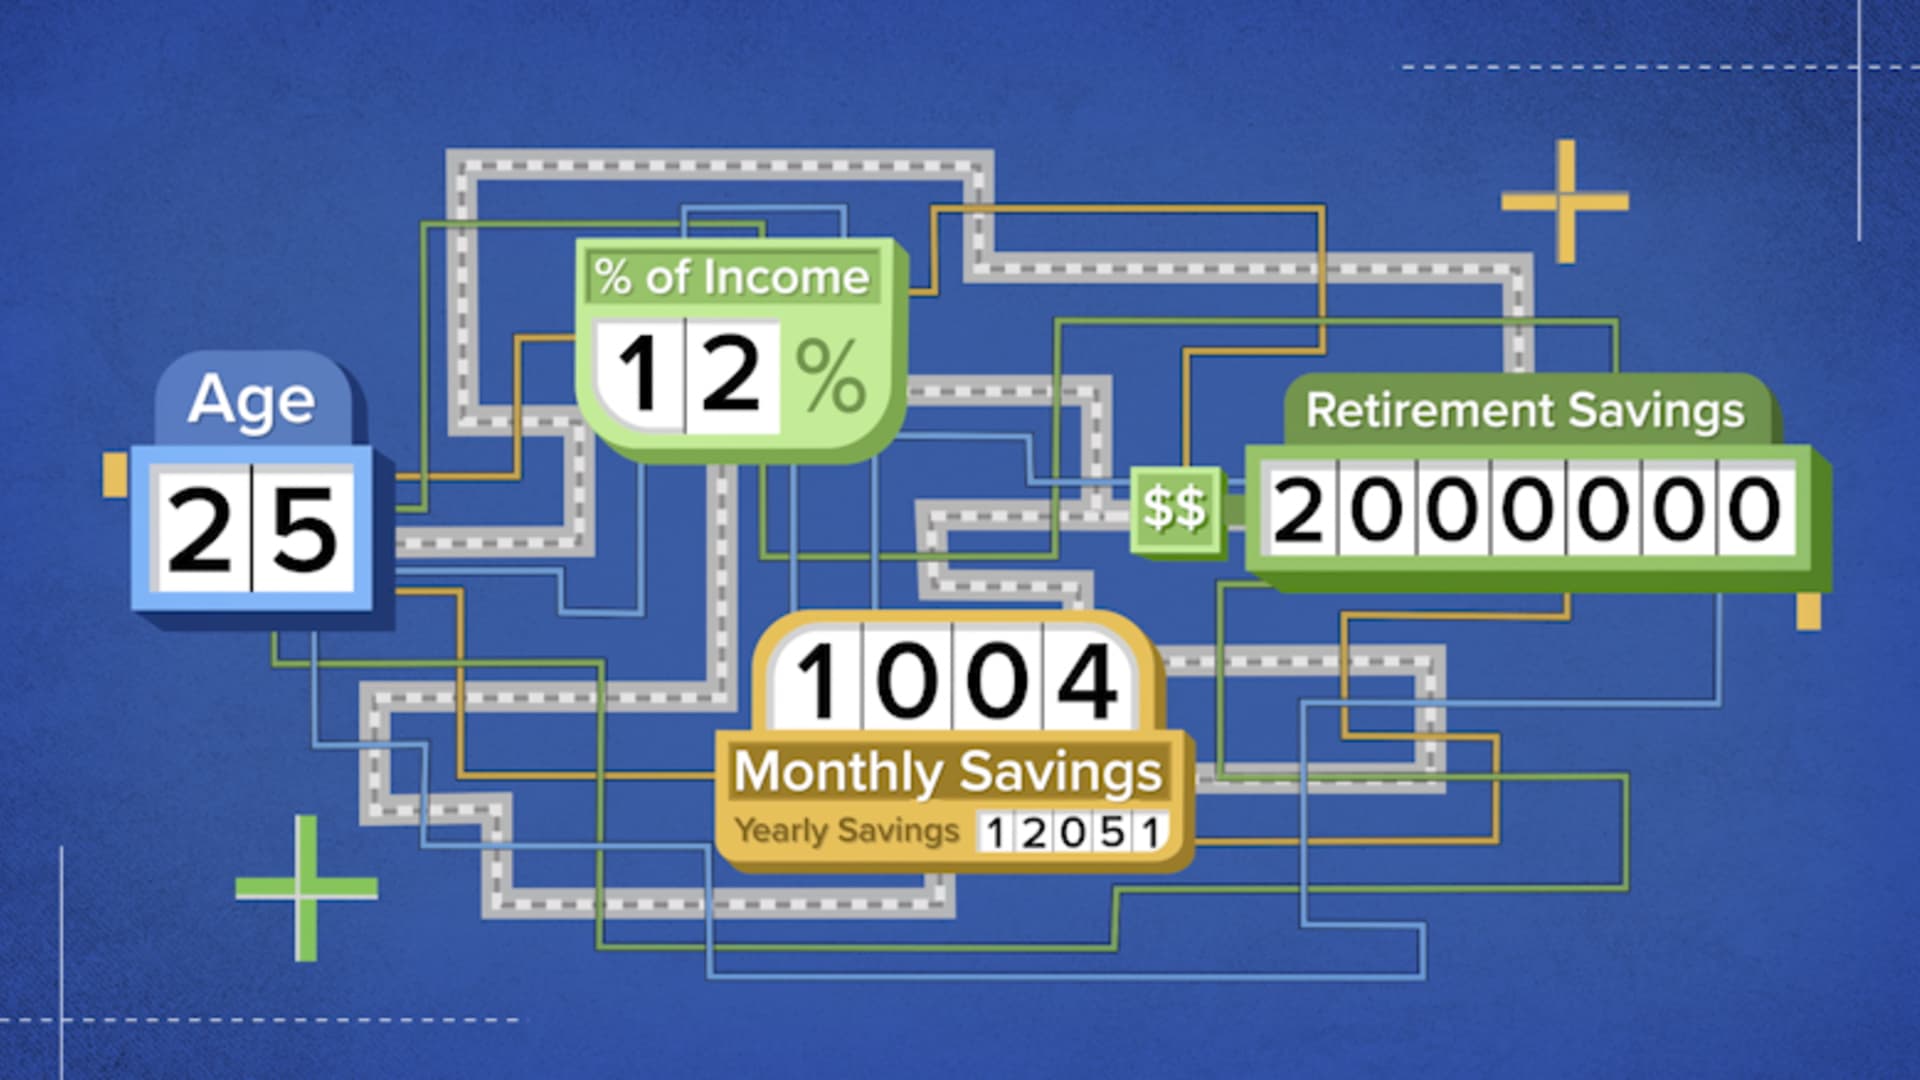 How to retire with $2 million if you make $100,000 per year 